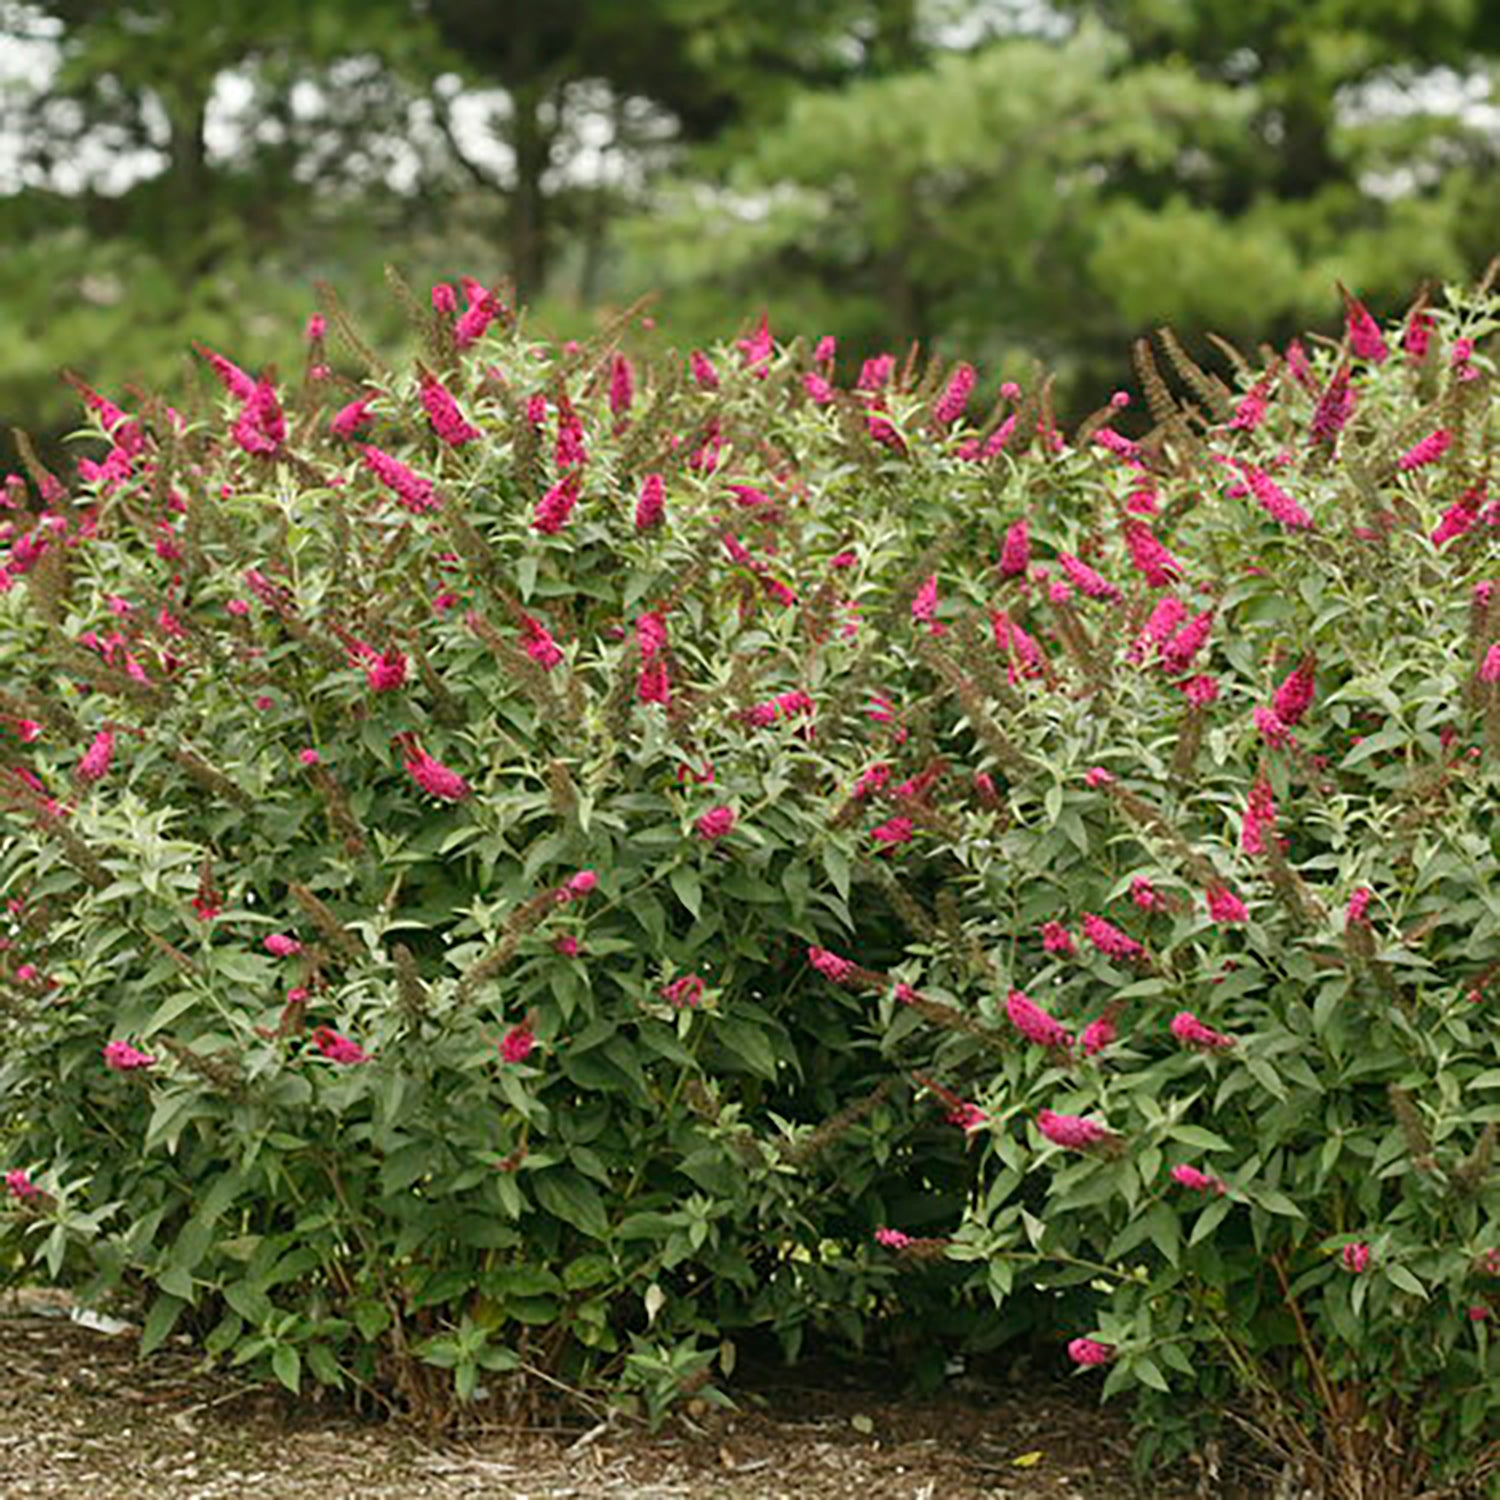 Miss Molly Butterfly Bush for Sale